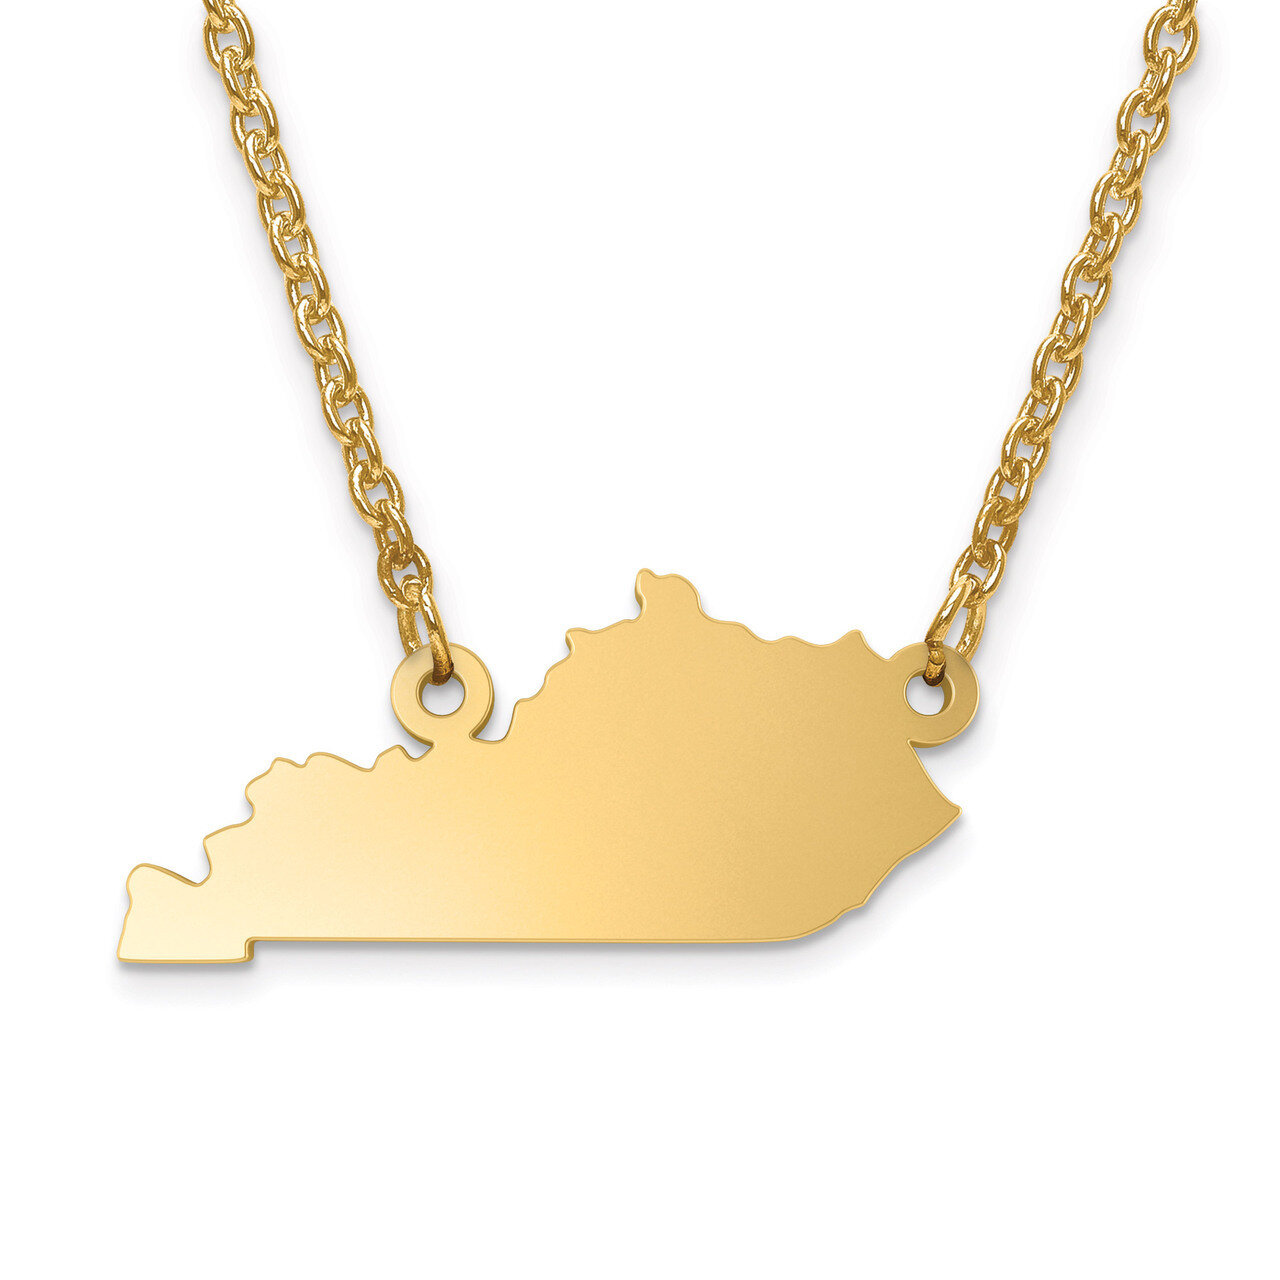 Kentucky State Pendant with Chain Engravable Gold-plated on Sterling Silver